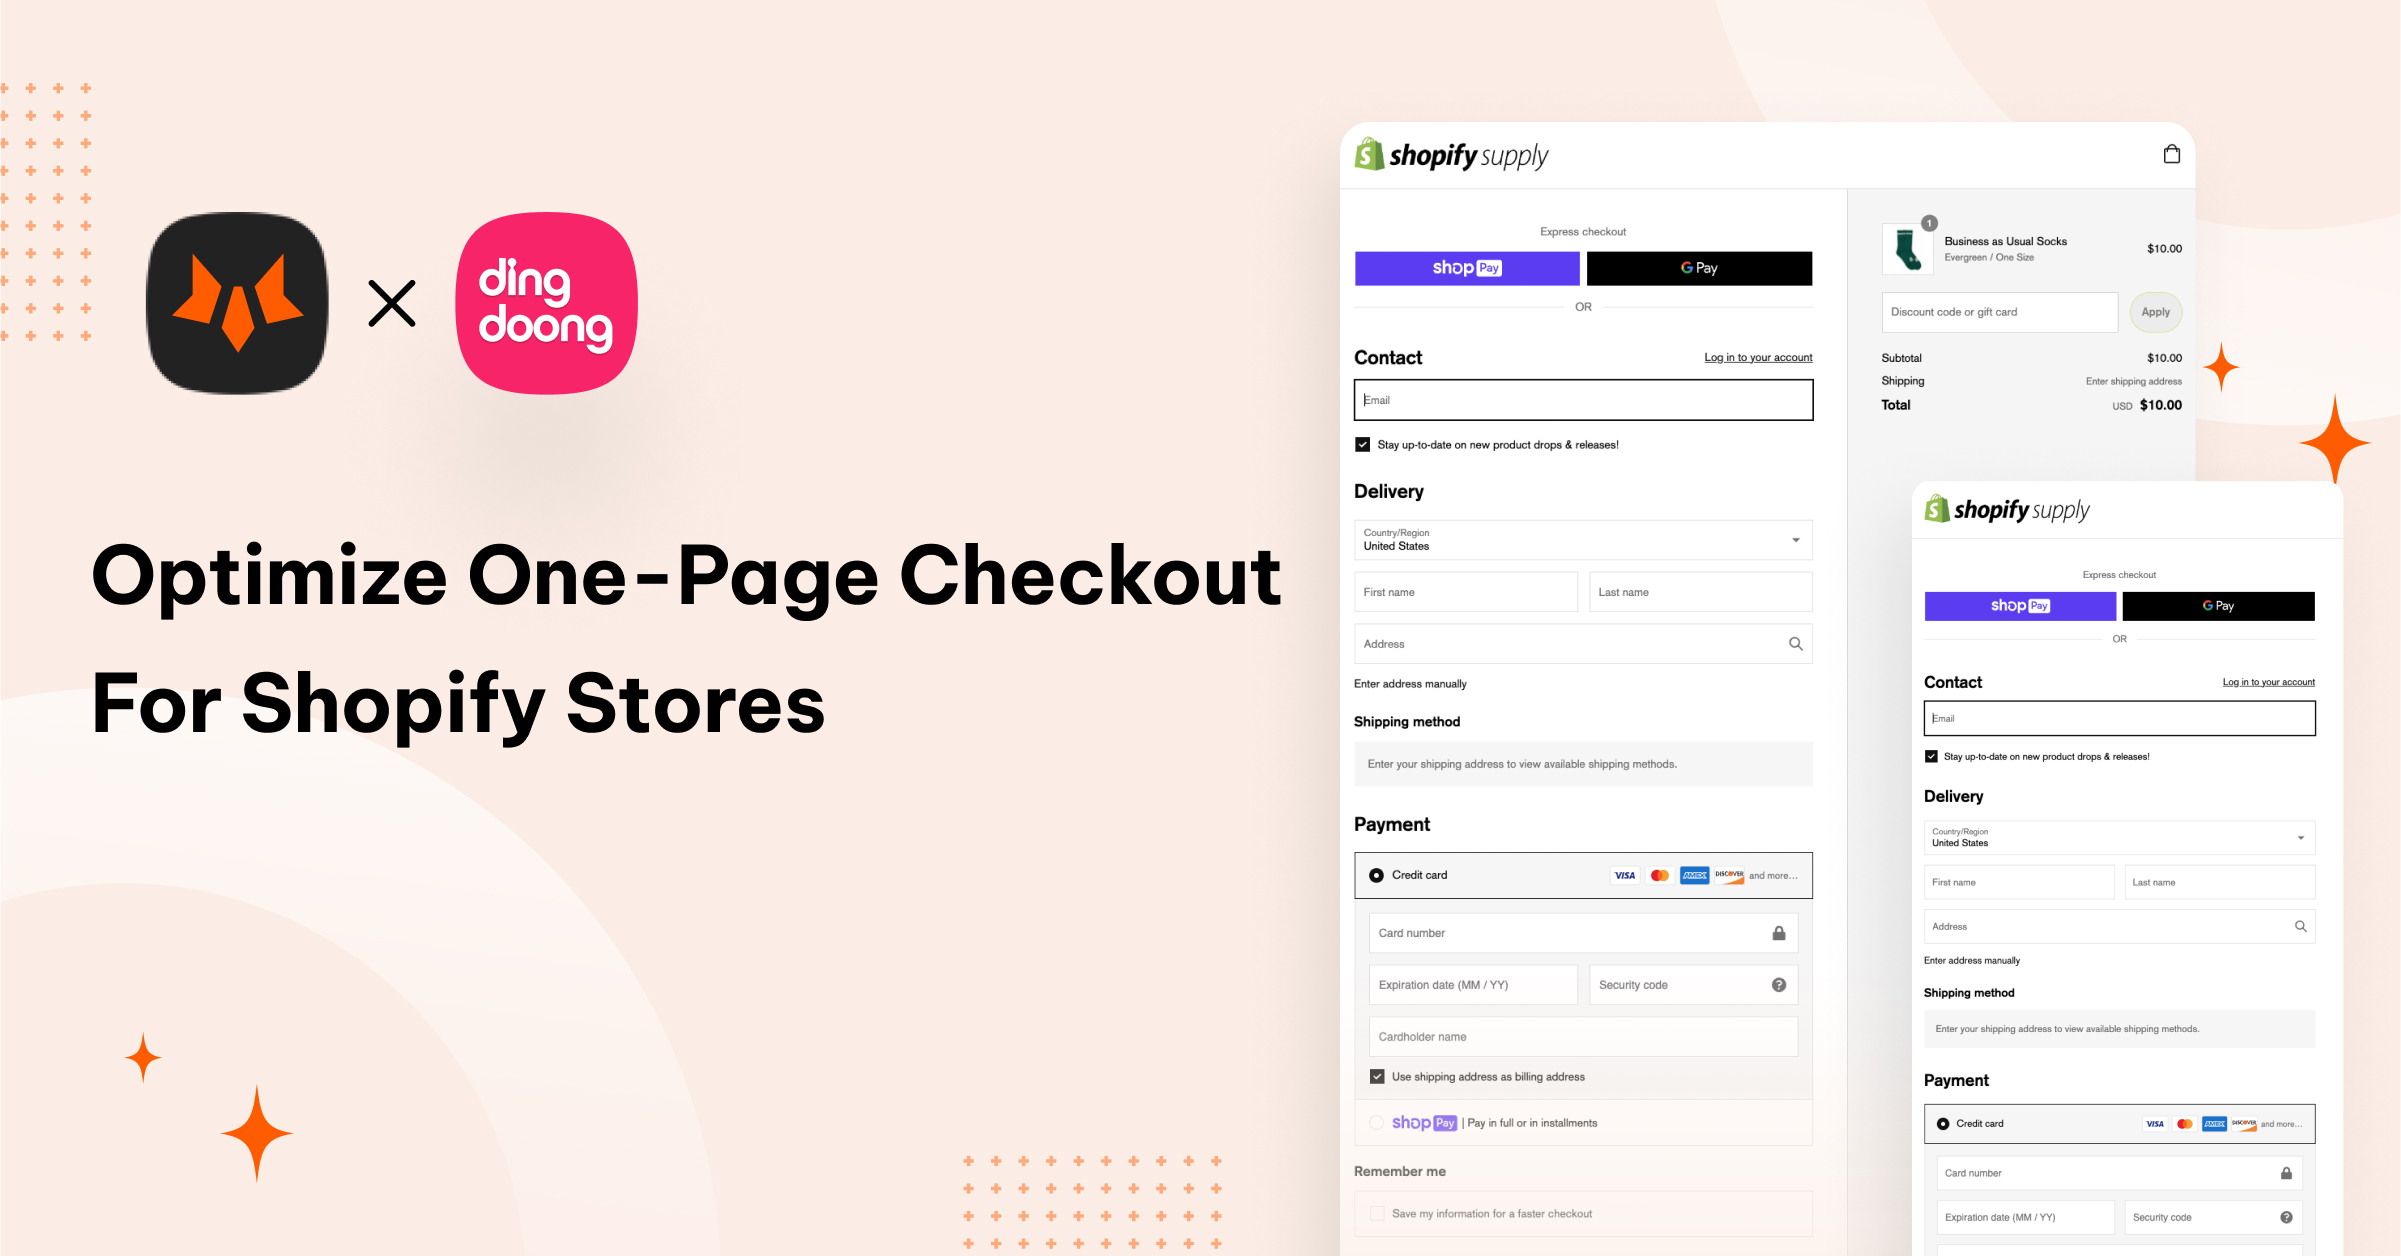 How To Make & Optimize One-Page Checkout For Your Shopify Store?